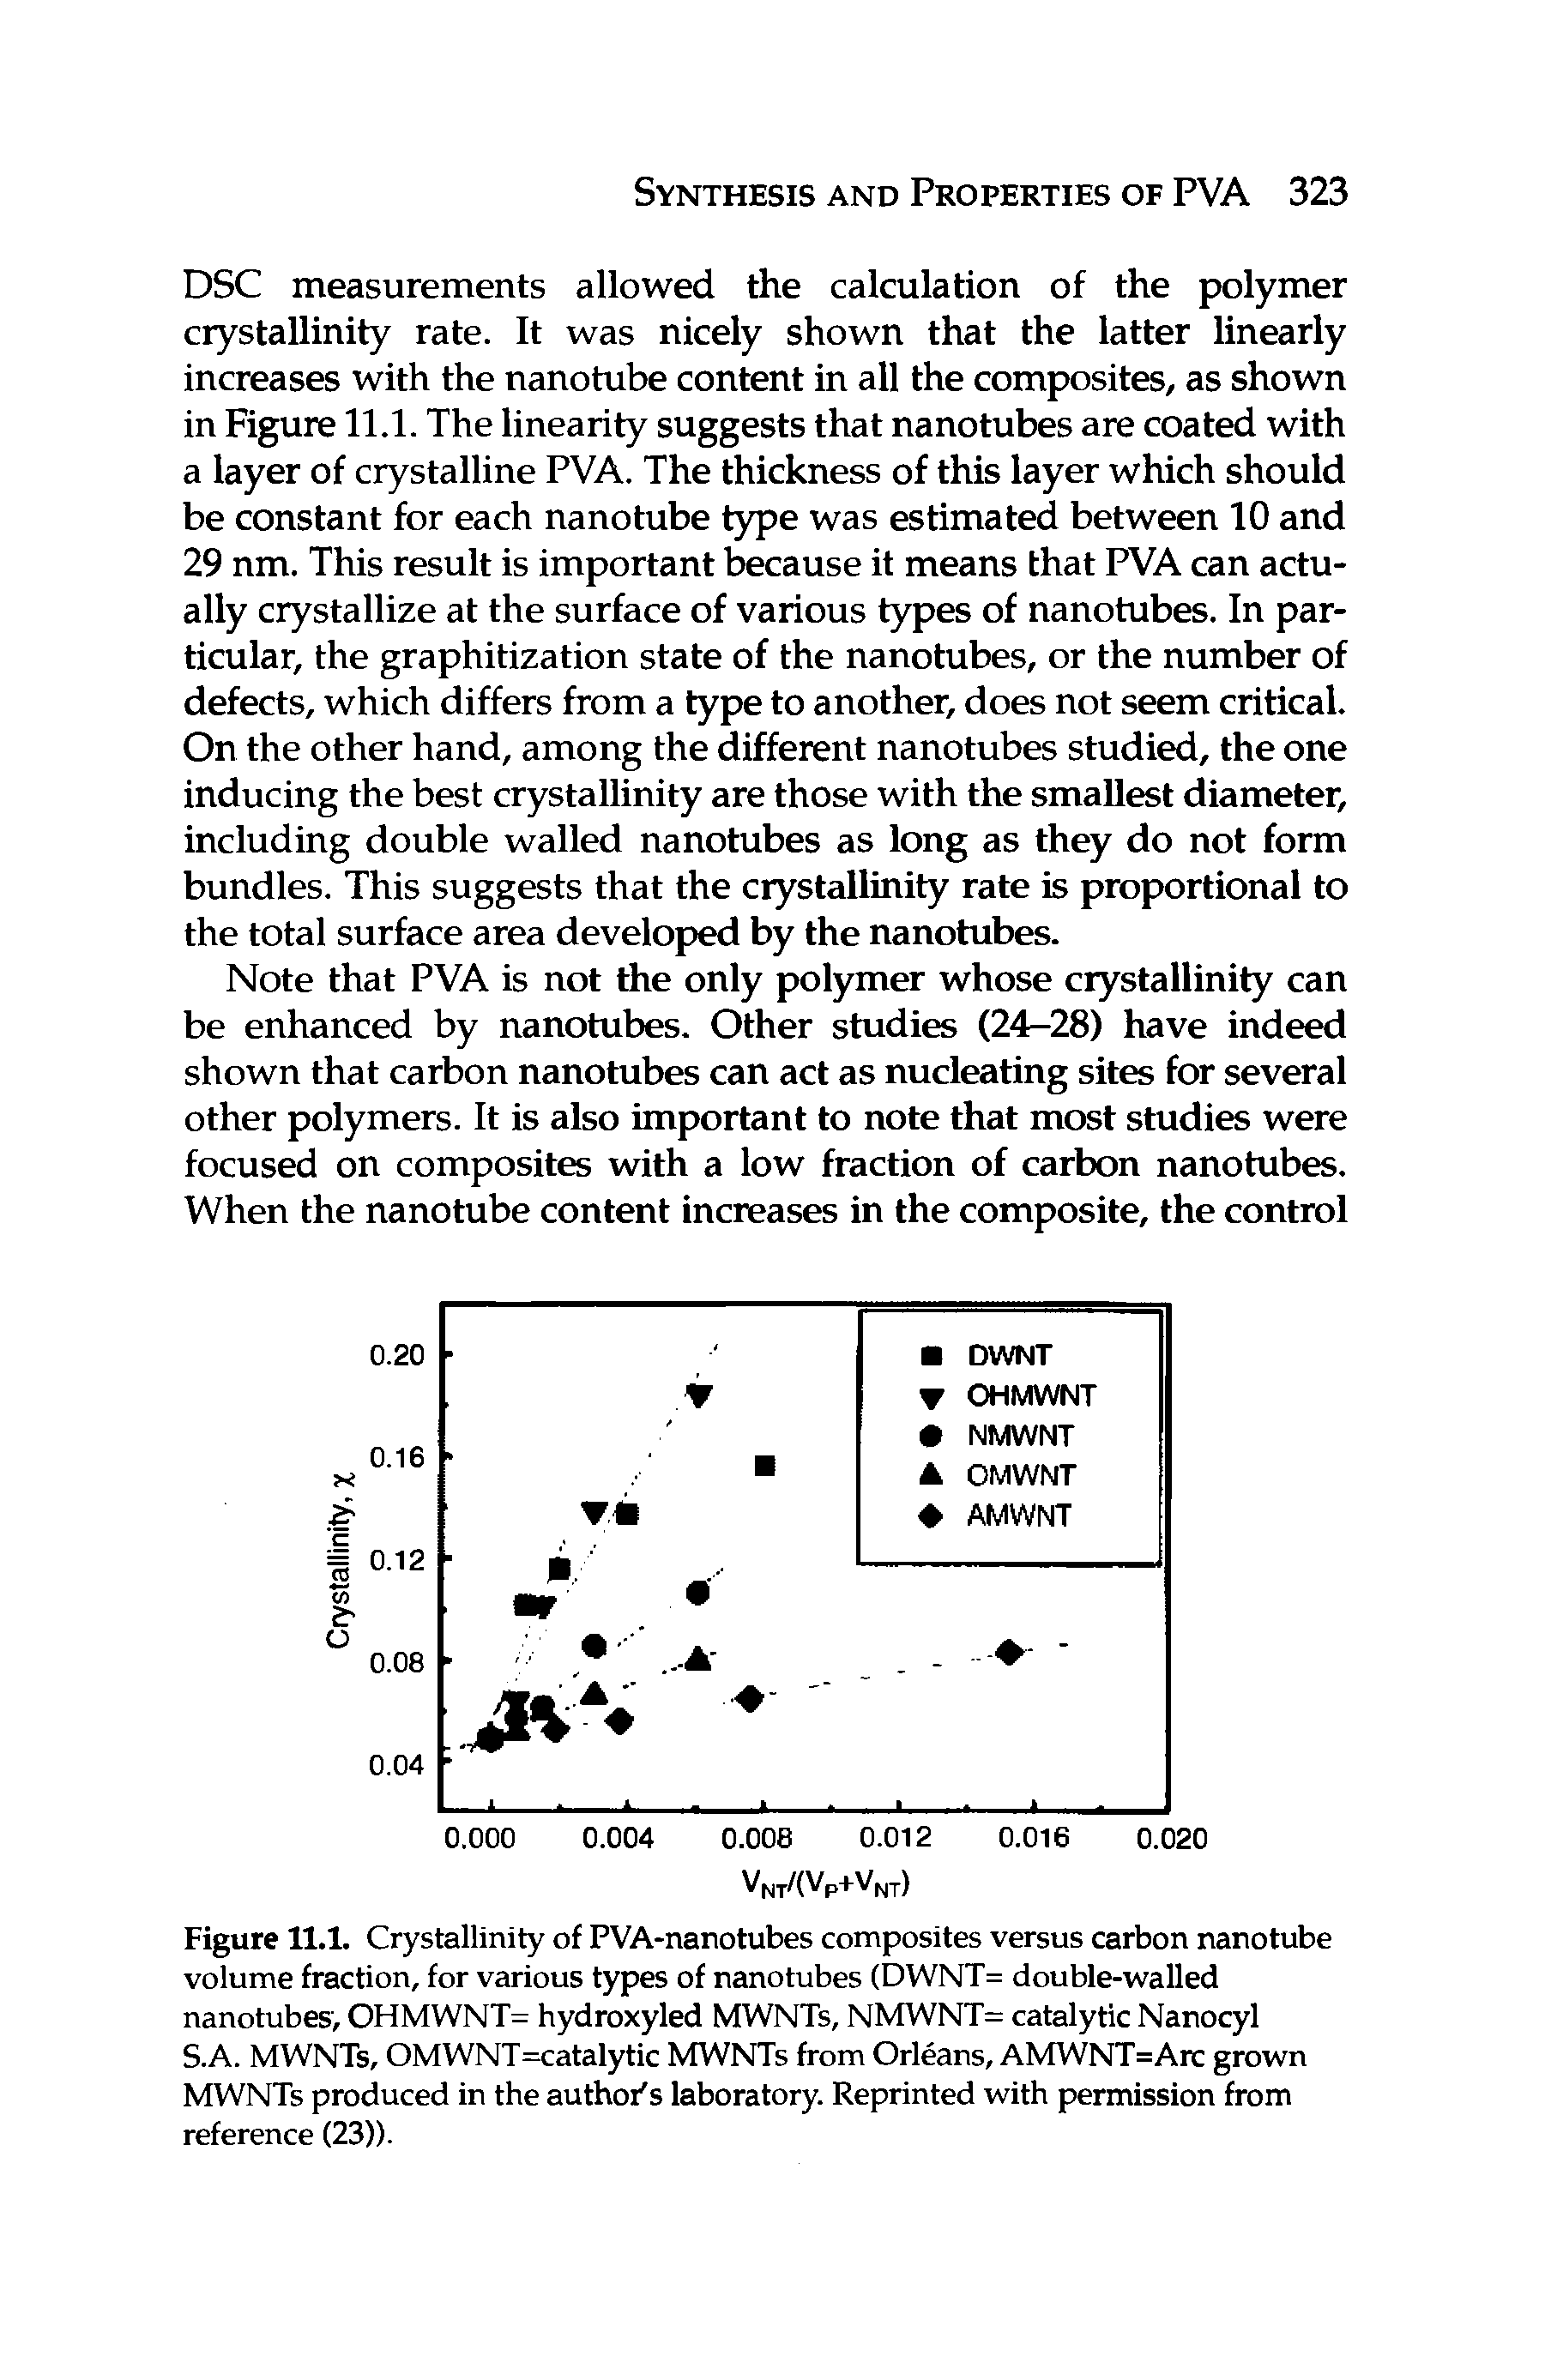 Figure 11.1. Crystallinity of PVA-nanotubes composites versus carbon nanotube volume fraction, for various types of nanotubes (DWNT= double-walled nanotubes, OHMWNT= hydroxyled MWNTs, NMWNT= catalytic Nanocyl S.A. MWNTs, OMWNT=catalytic MWNTs from Orleans, AMWNT=Arc grown MWNTs produced in the author s laboratory. Reprinted with permission from reference (23)).